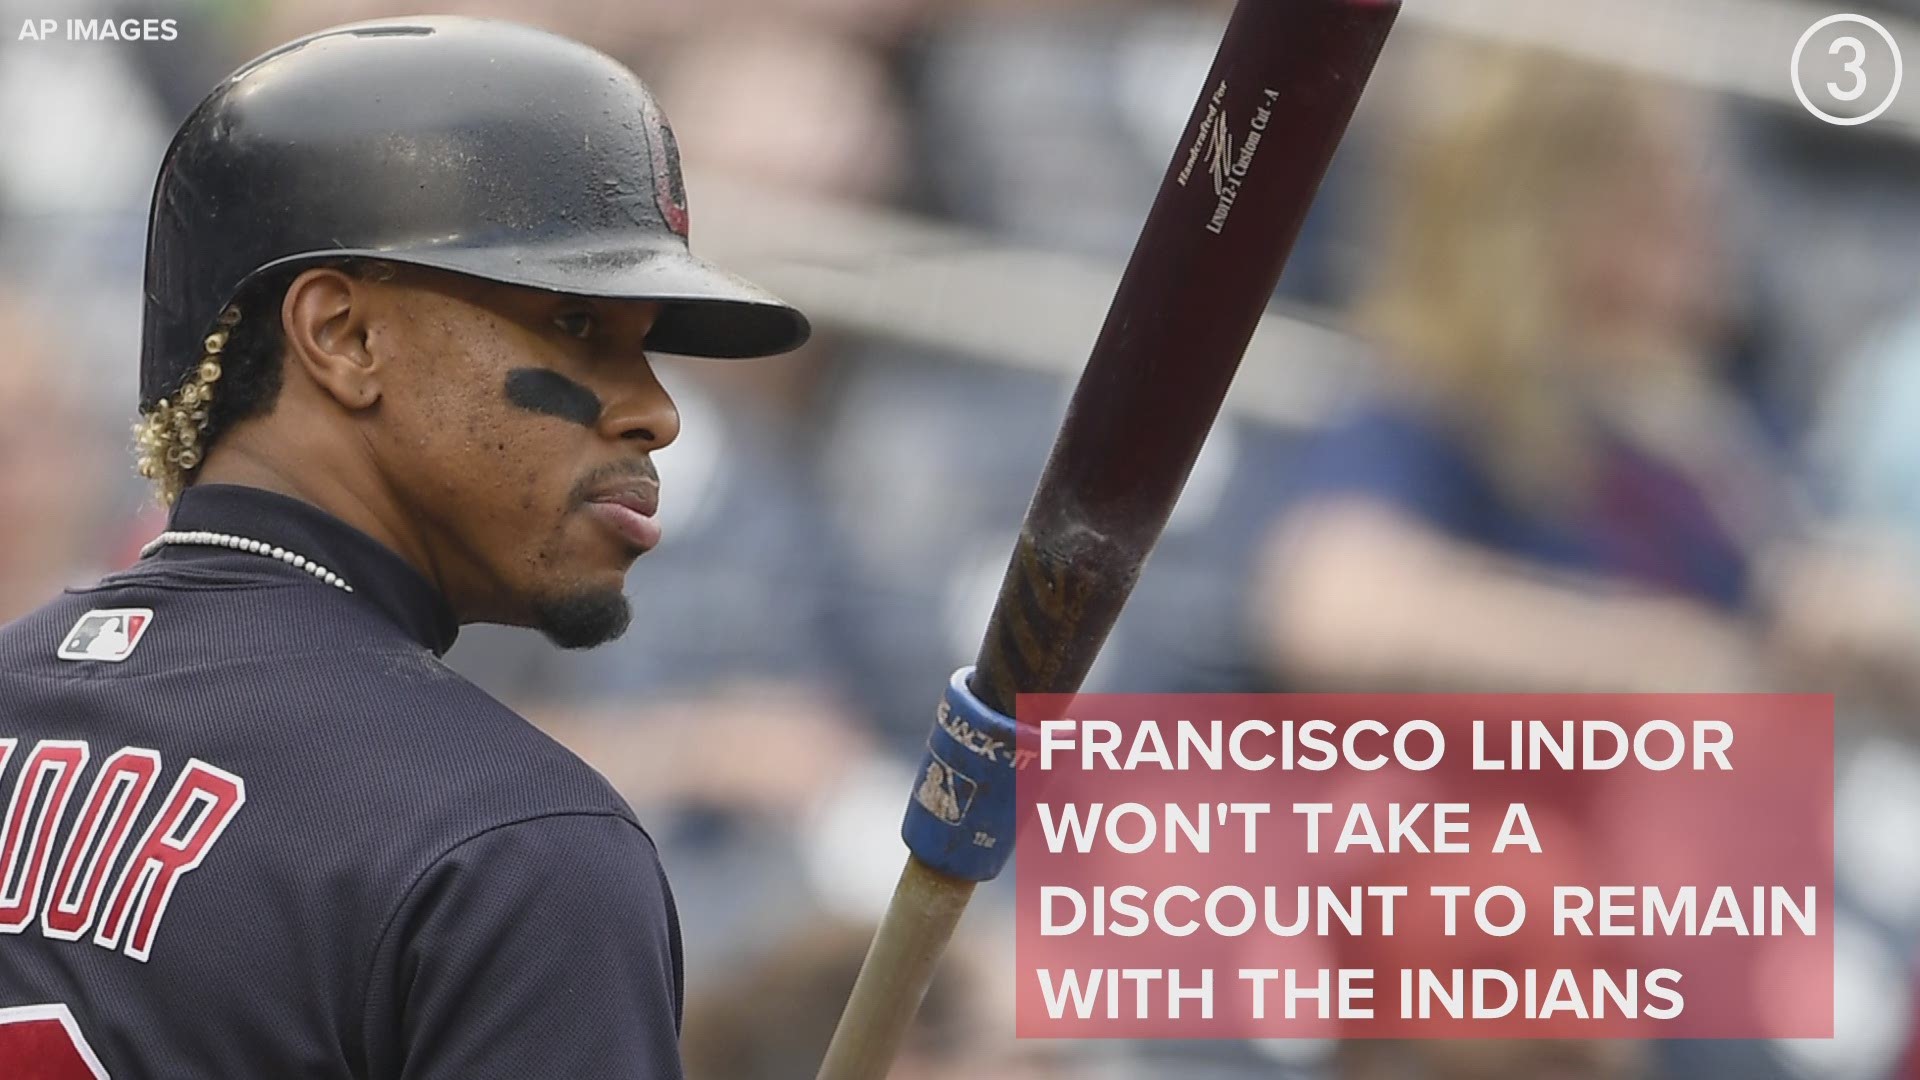 Speaking to Jayson Stark of The Athletic, Francisco Lindor revealed he's not willing to take a hometown discount to remain with the Cleveland Indians.